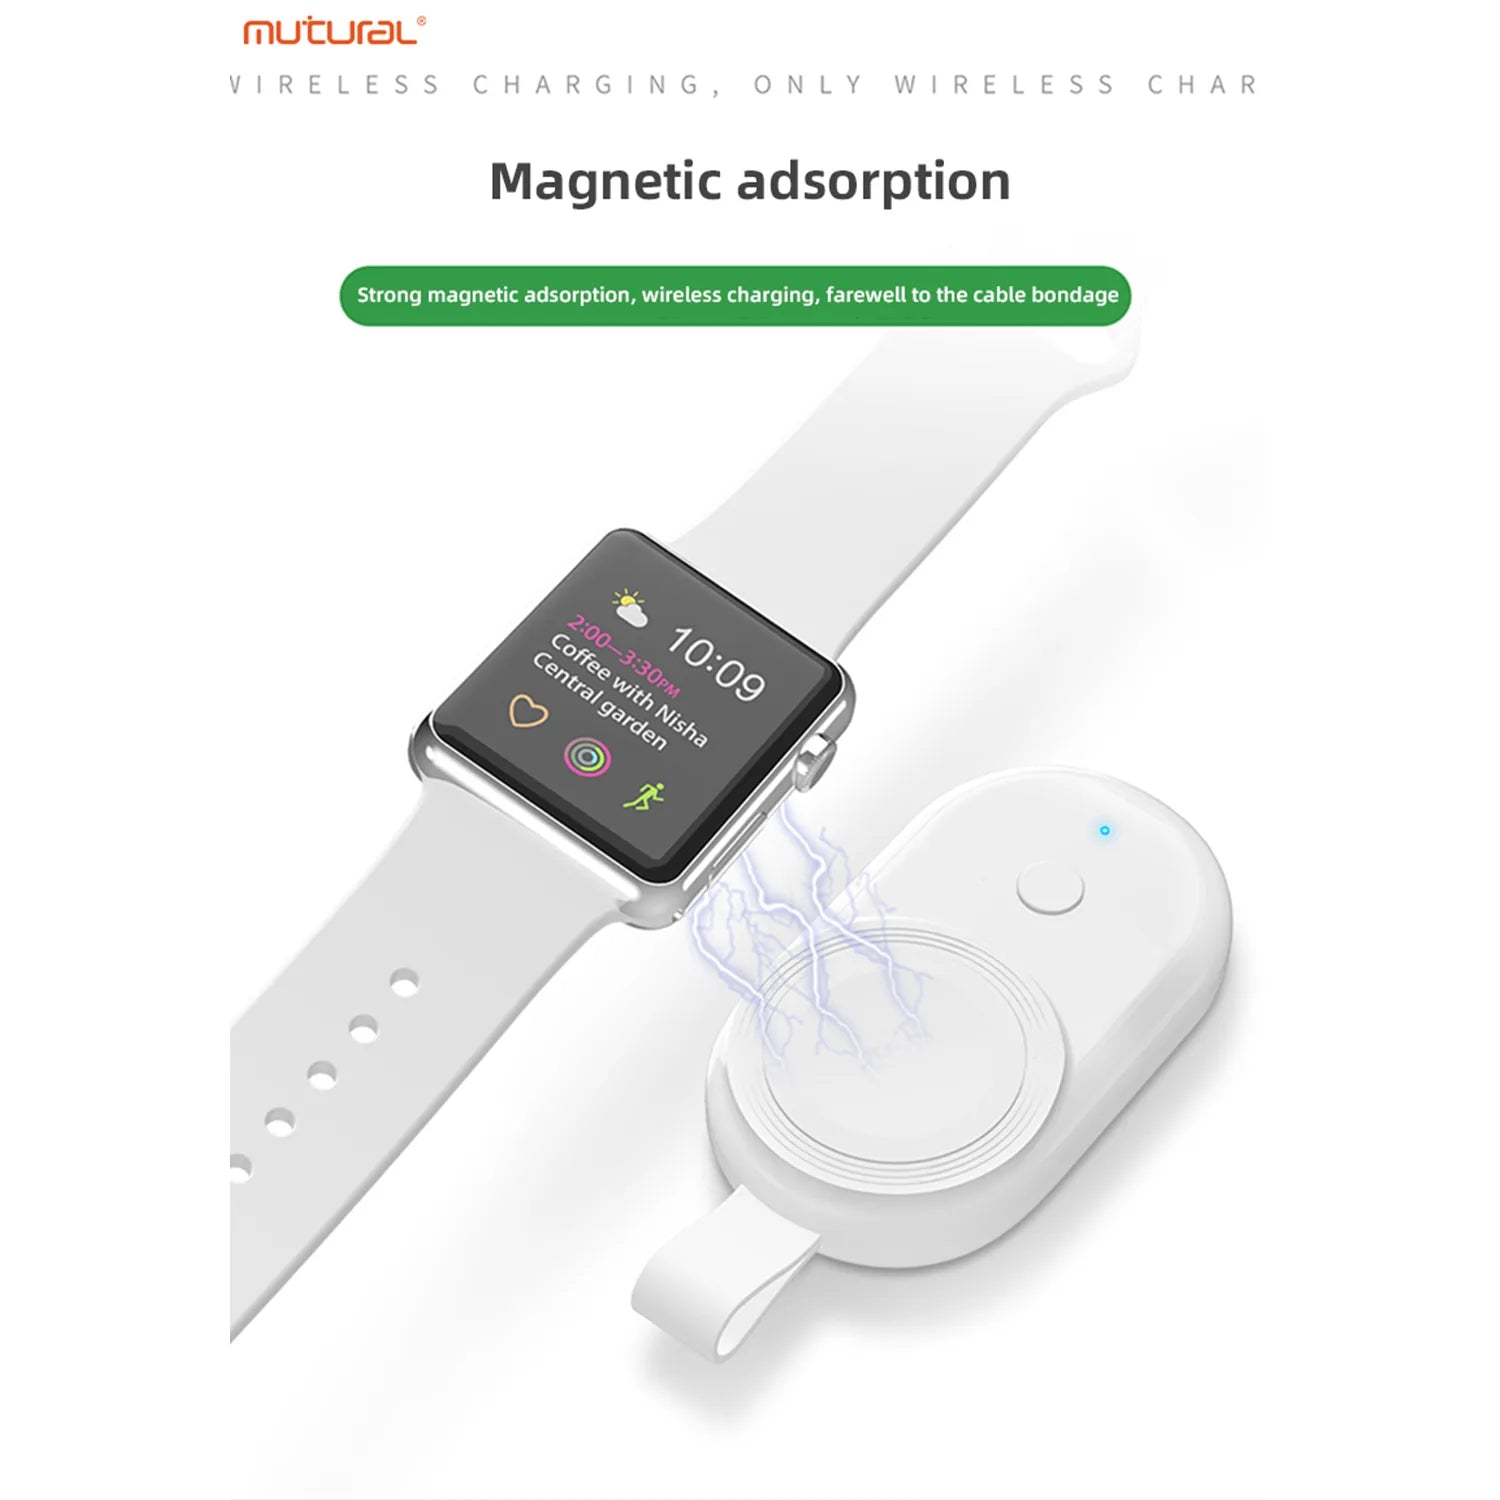 Mutural Apple Watch Charger with 1100mAh Battery, Lightning Input, White